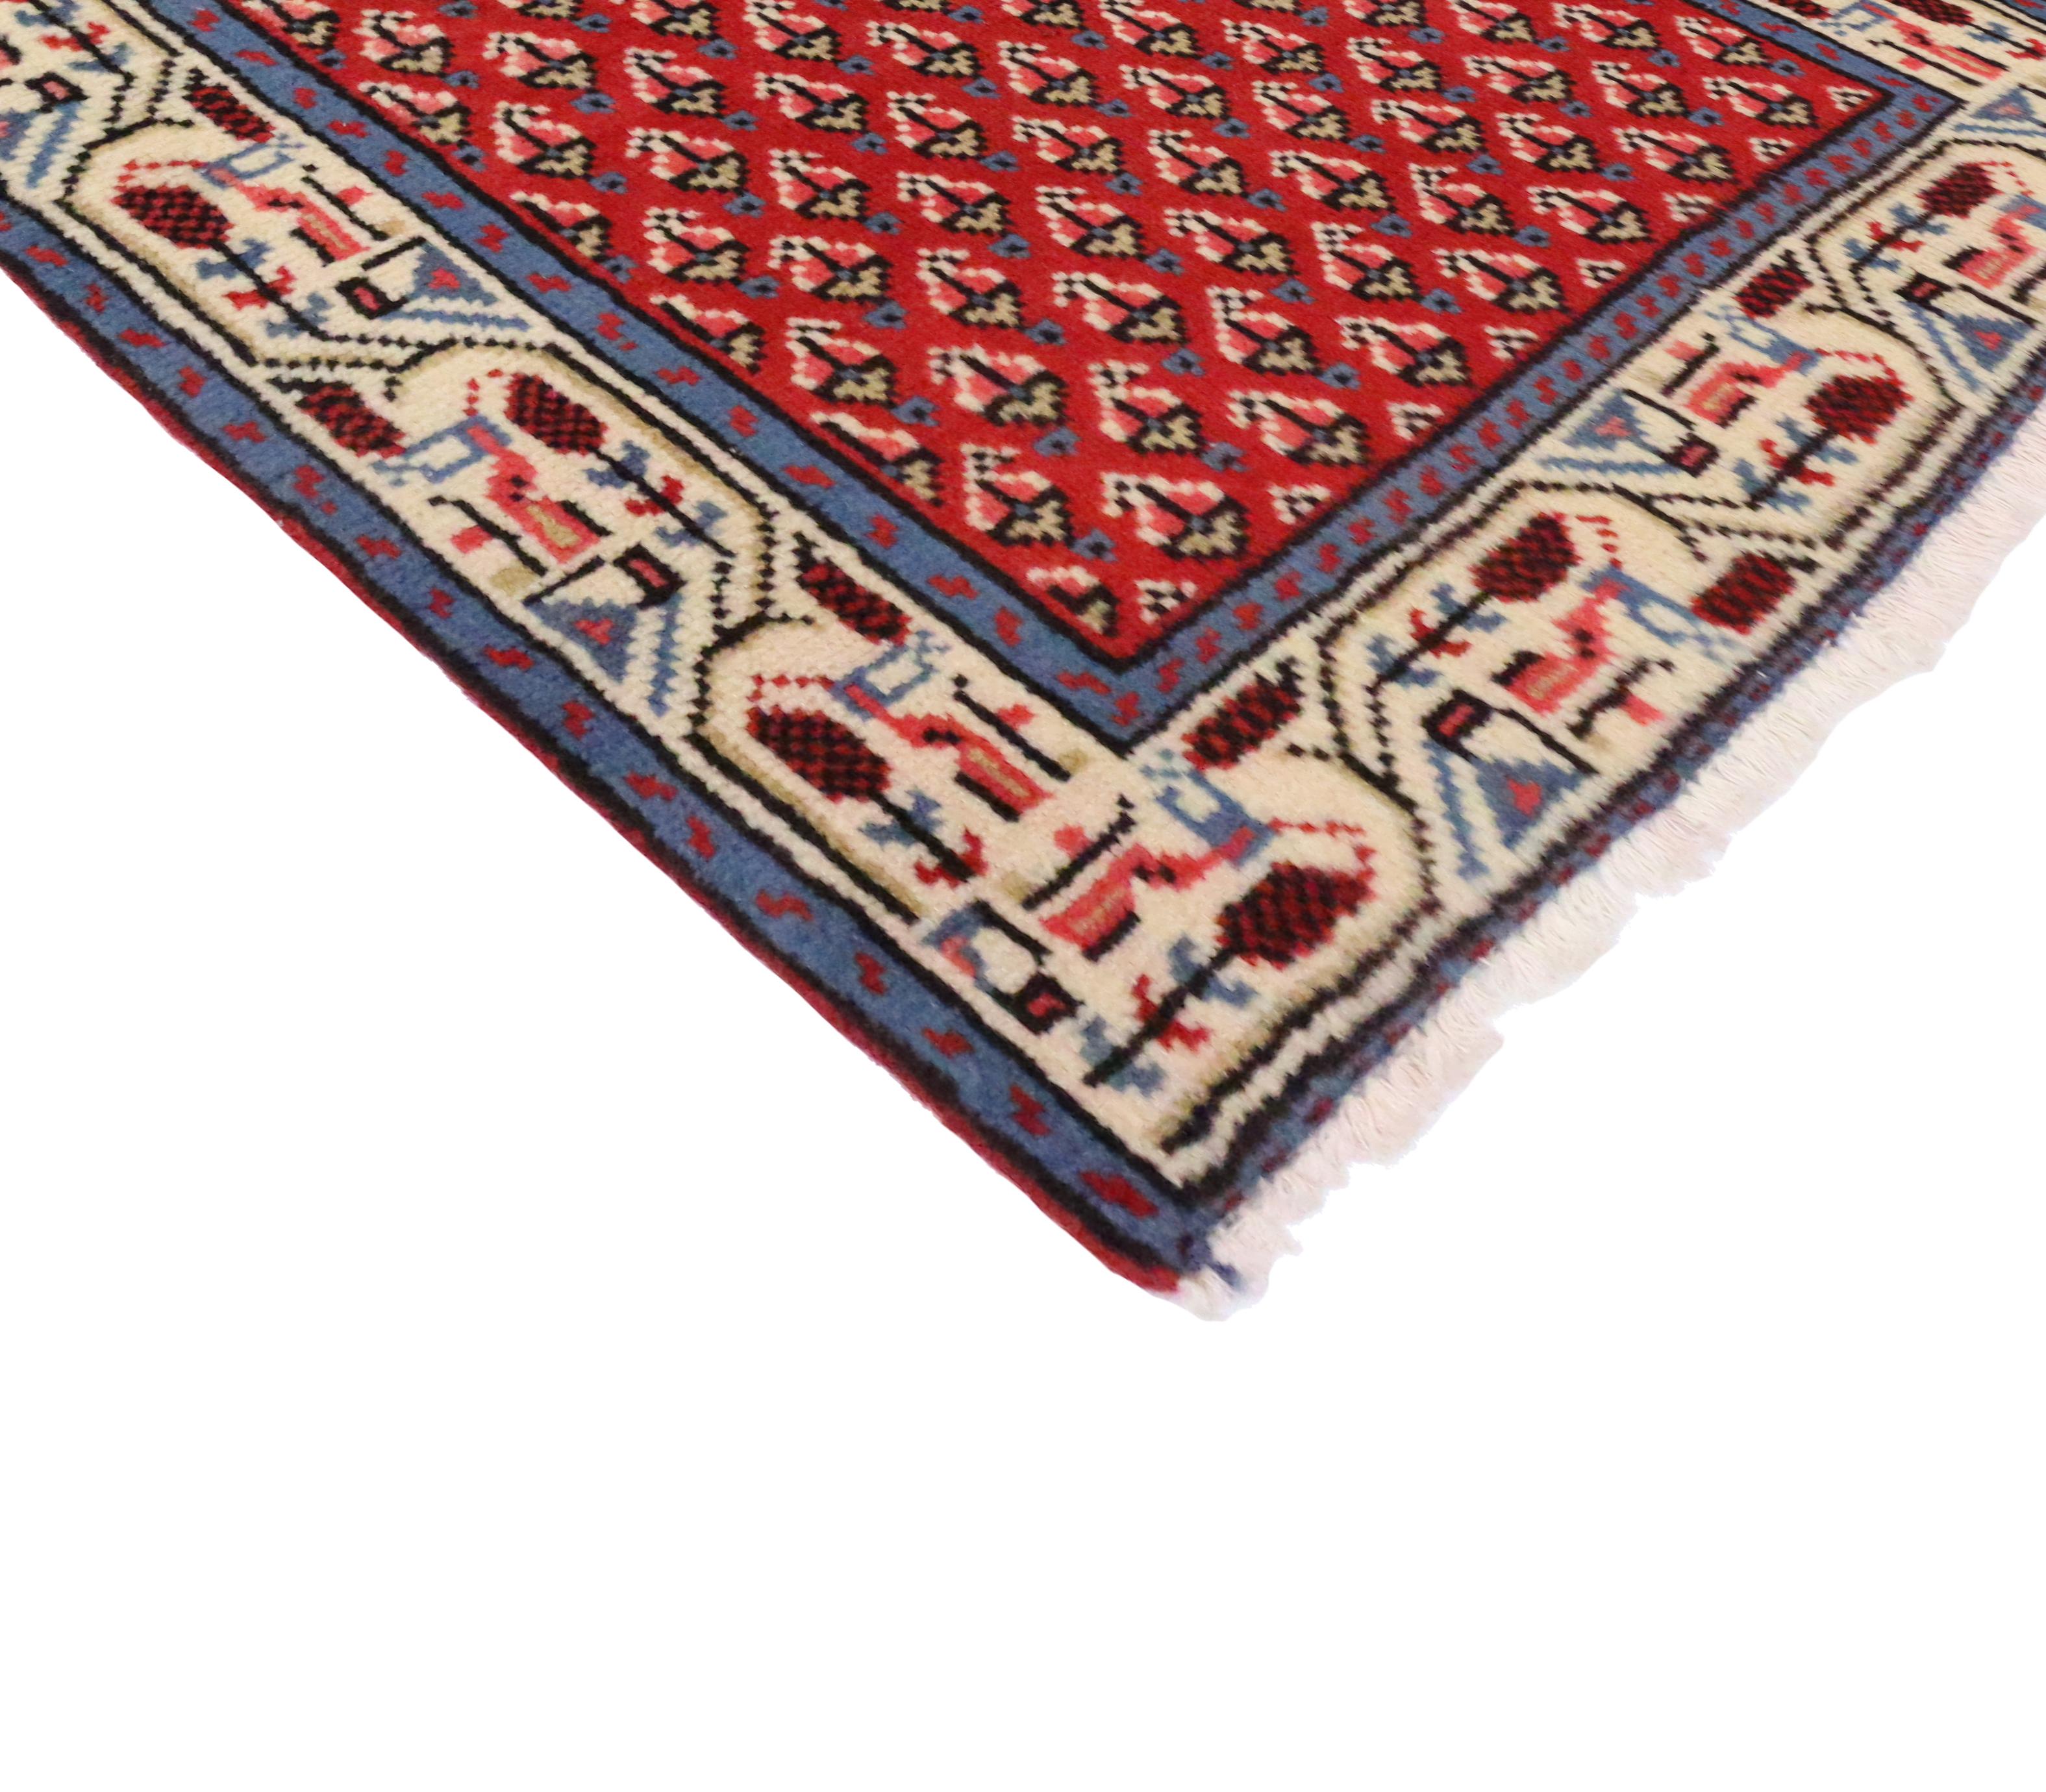 76152 Vintage Persian Saraband Hamadan rug with Mir Boteh, Kitchen, Foyer, or Entry 02'00 X 03'10. This vintage Persian Hamadan accent rug with Saraband rug style features an all-over delicate pattern of mir boteh motifs in diagonal rows in a red